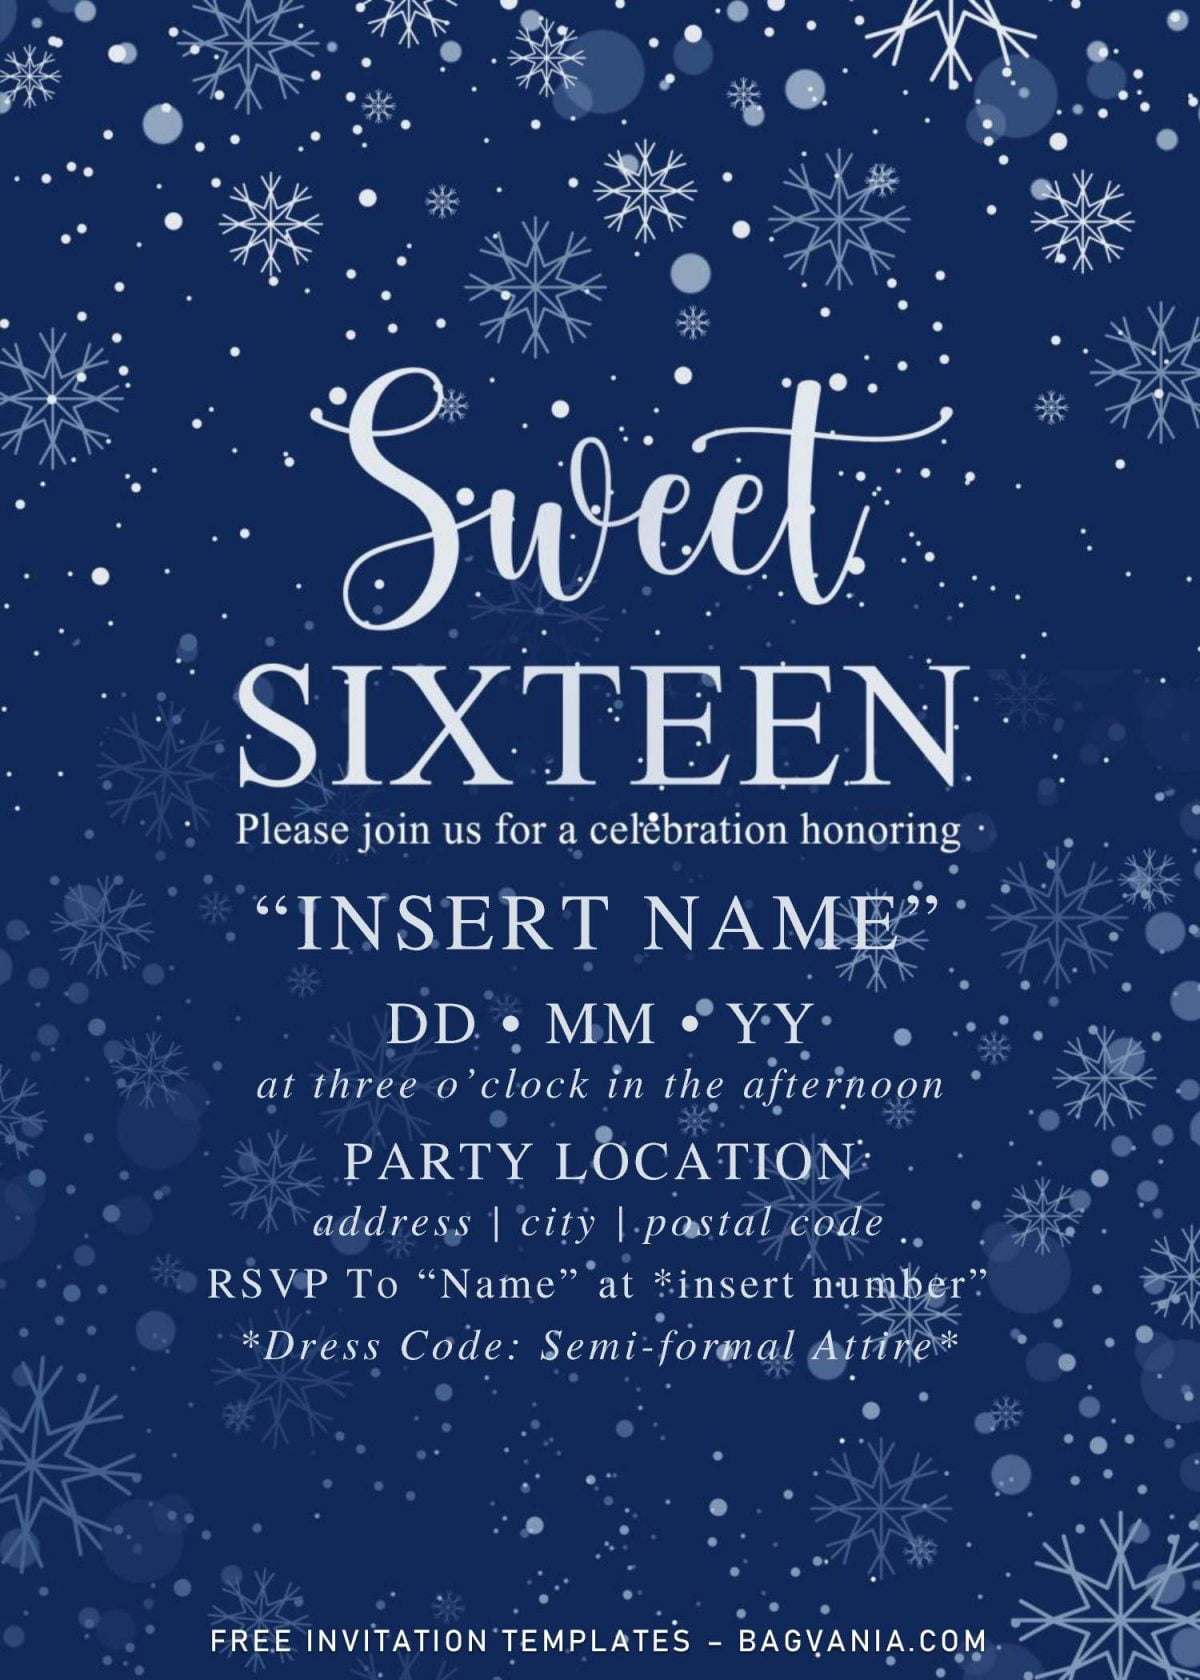 Free Winter Sweet Sixteen Birthday Invitation Templates For Word and has white snowflakes border